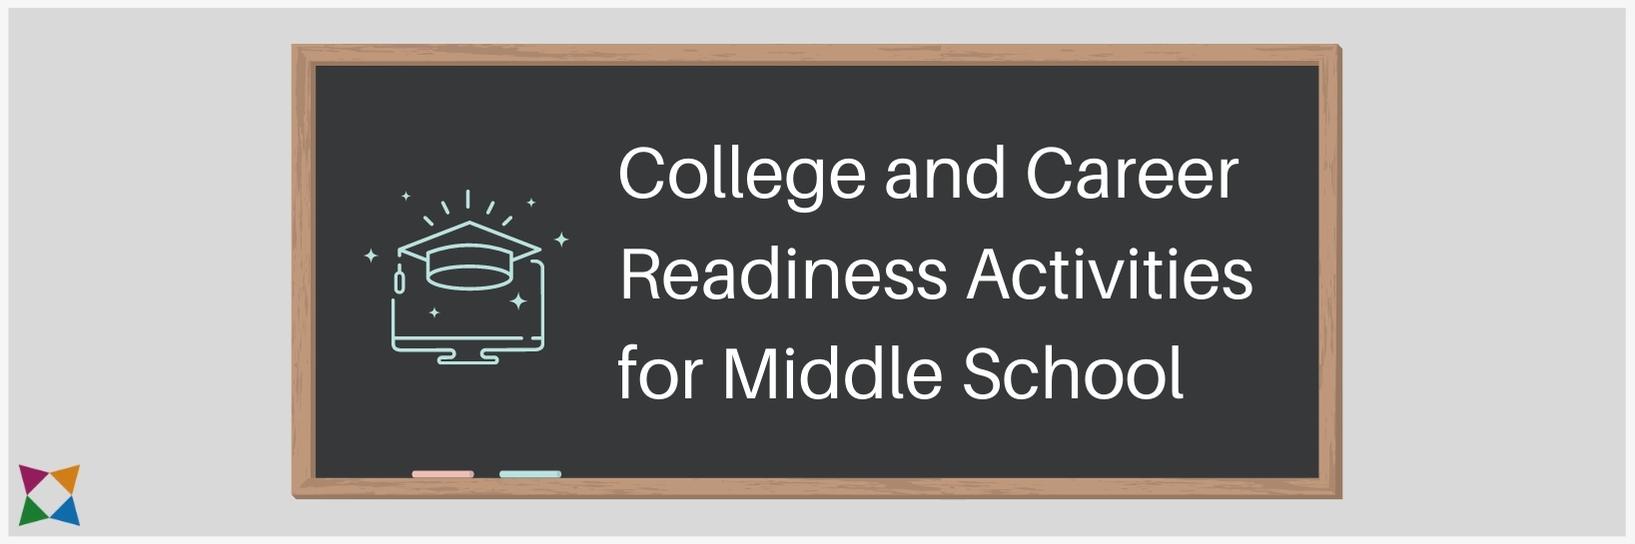 3 Top College and Career Readiness Activities for Middle School